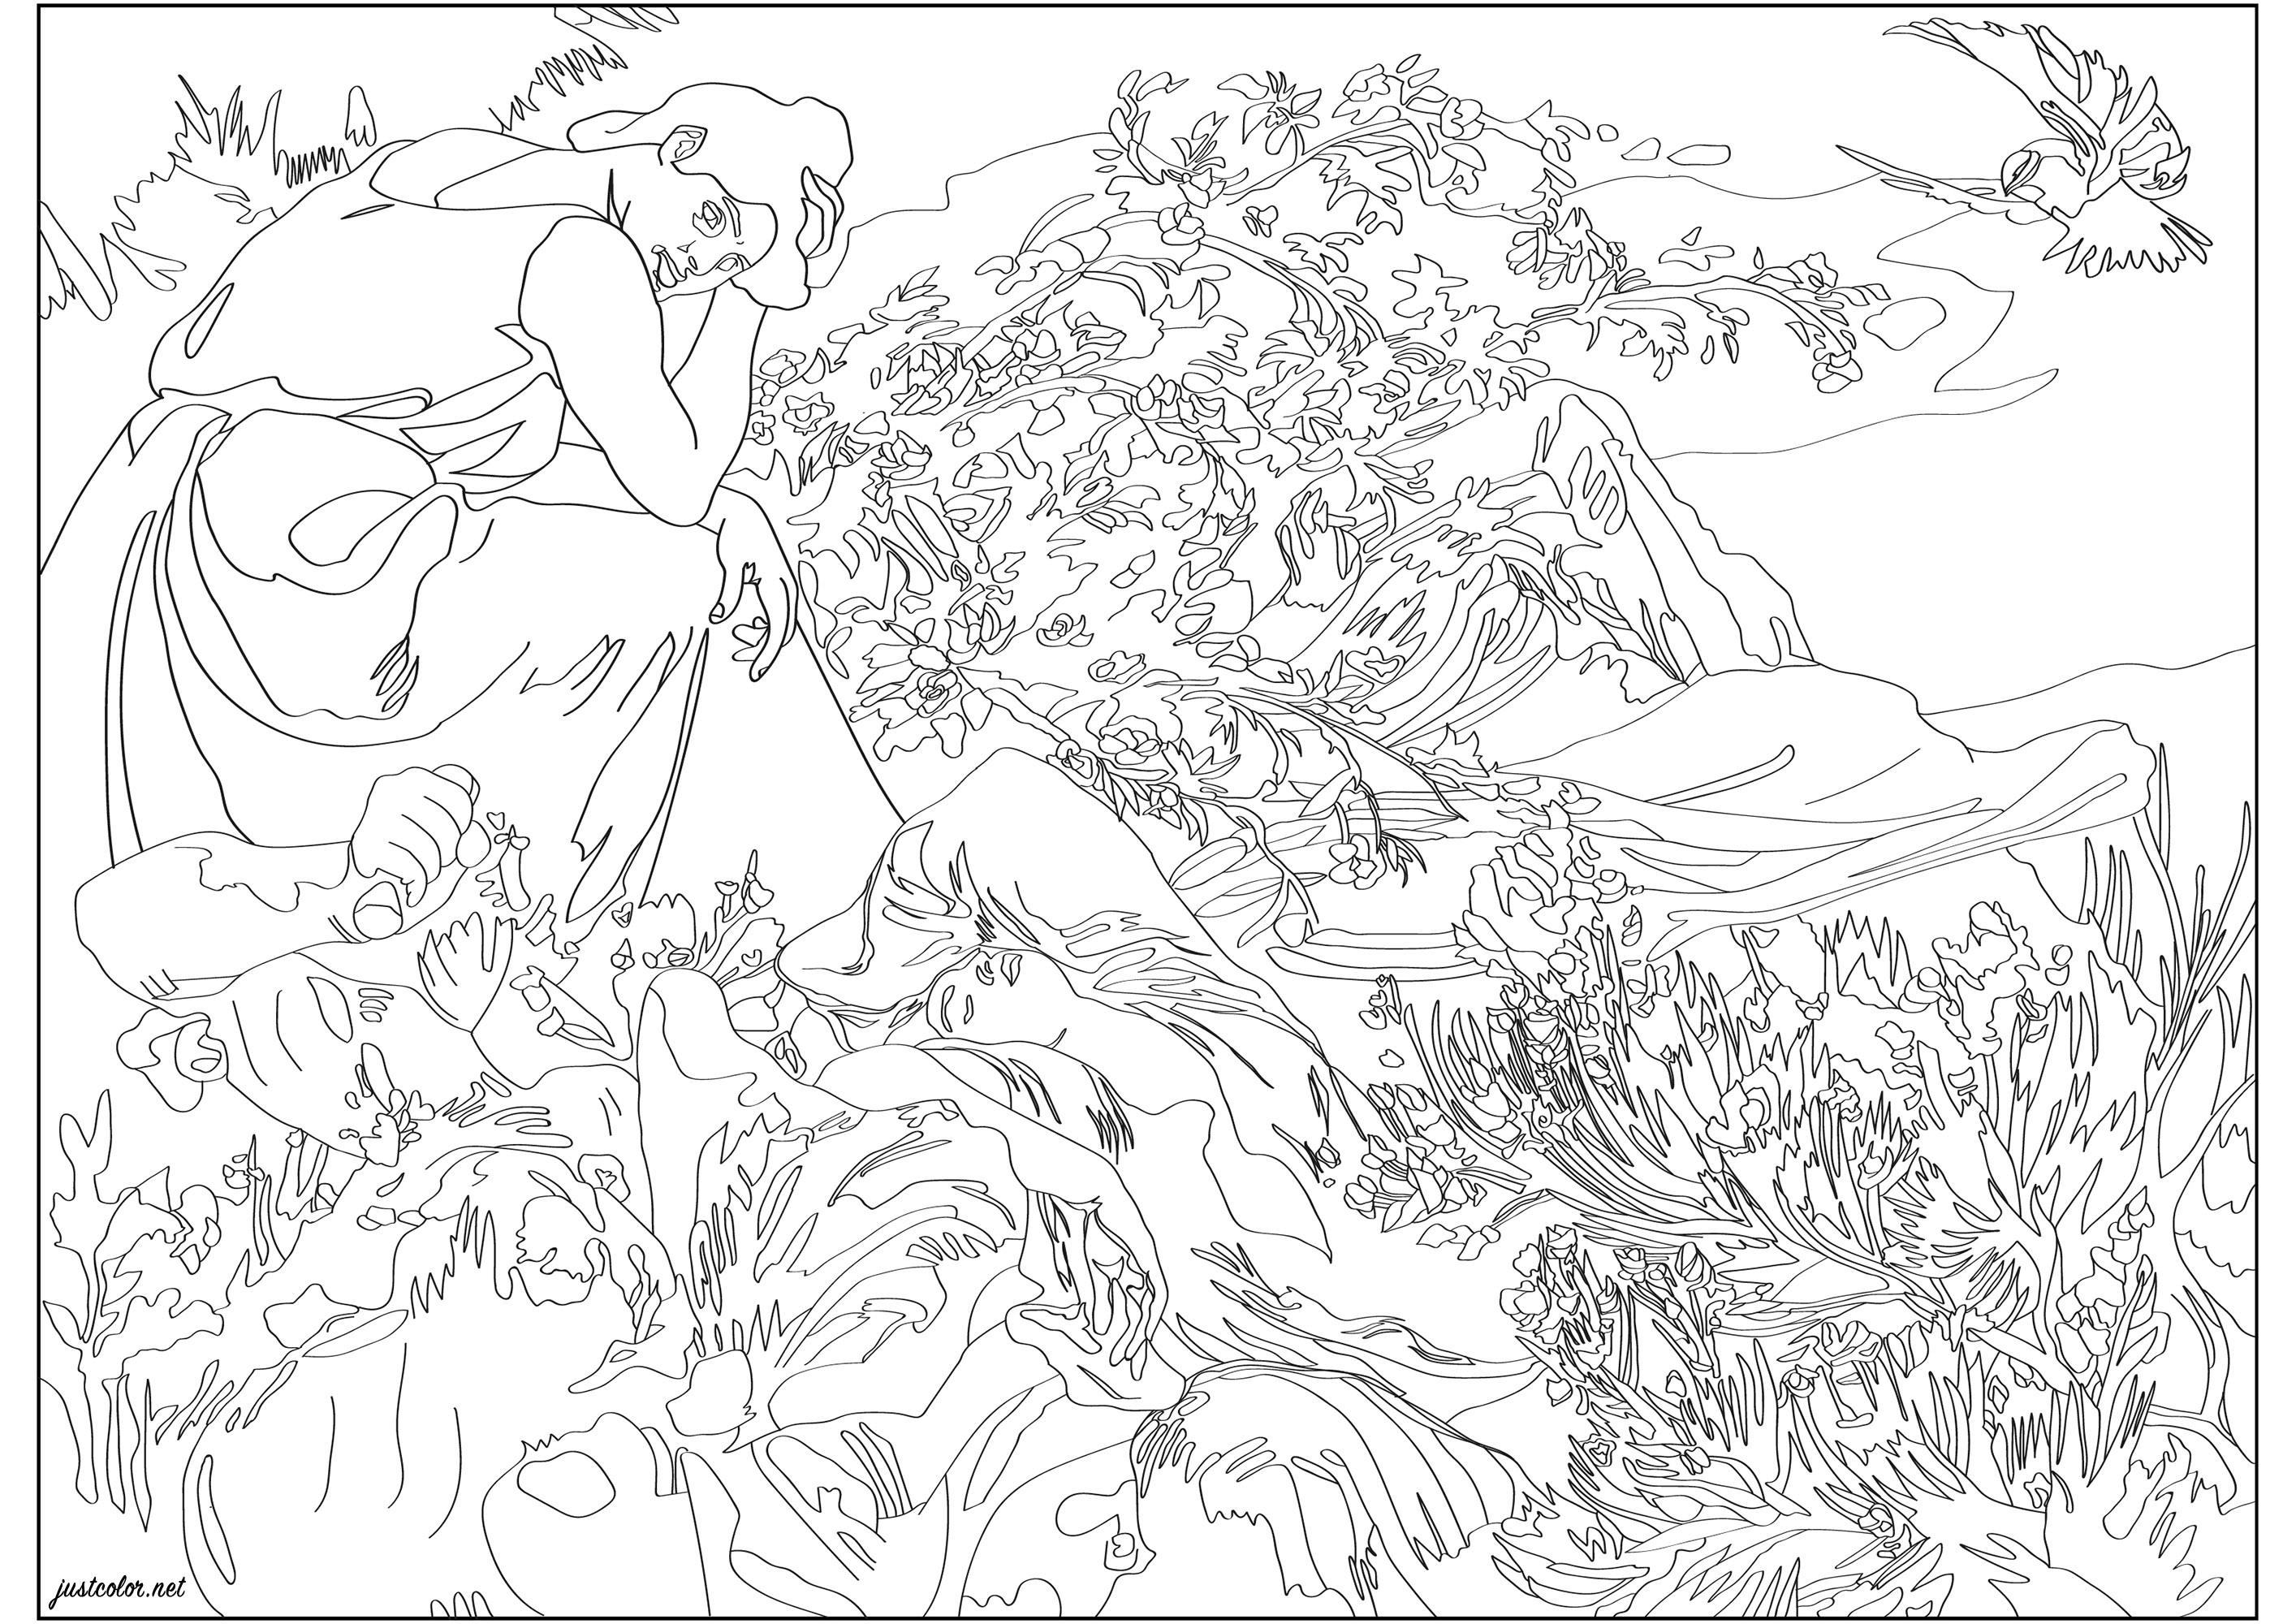 Coloring page created from Victor Prouvé's painting 'Stay of peace and joy' (1899). Born in Nancy in 1858, the son of a fine seamstress and an embroidery designer, Victor Prouvé studied drawing at the municipal school in his hometown. A few years later, he joined the School of Fine Arts in Paris as a scholarship holder, where he studied under the academic painter Alexandre Cabanel. He exhibited at the Salon of the National Society of Fine Arts from 1882 where he won several prizes while receiving his first orders.